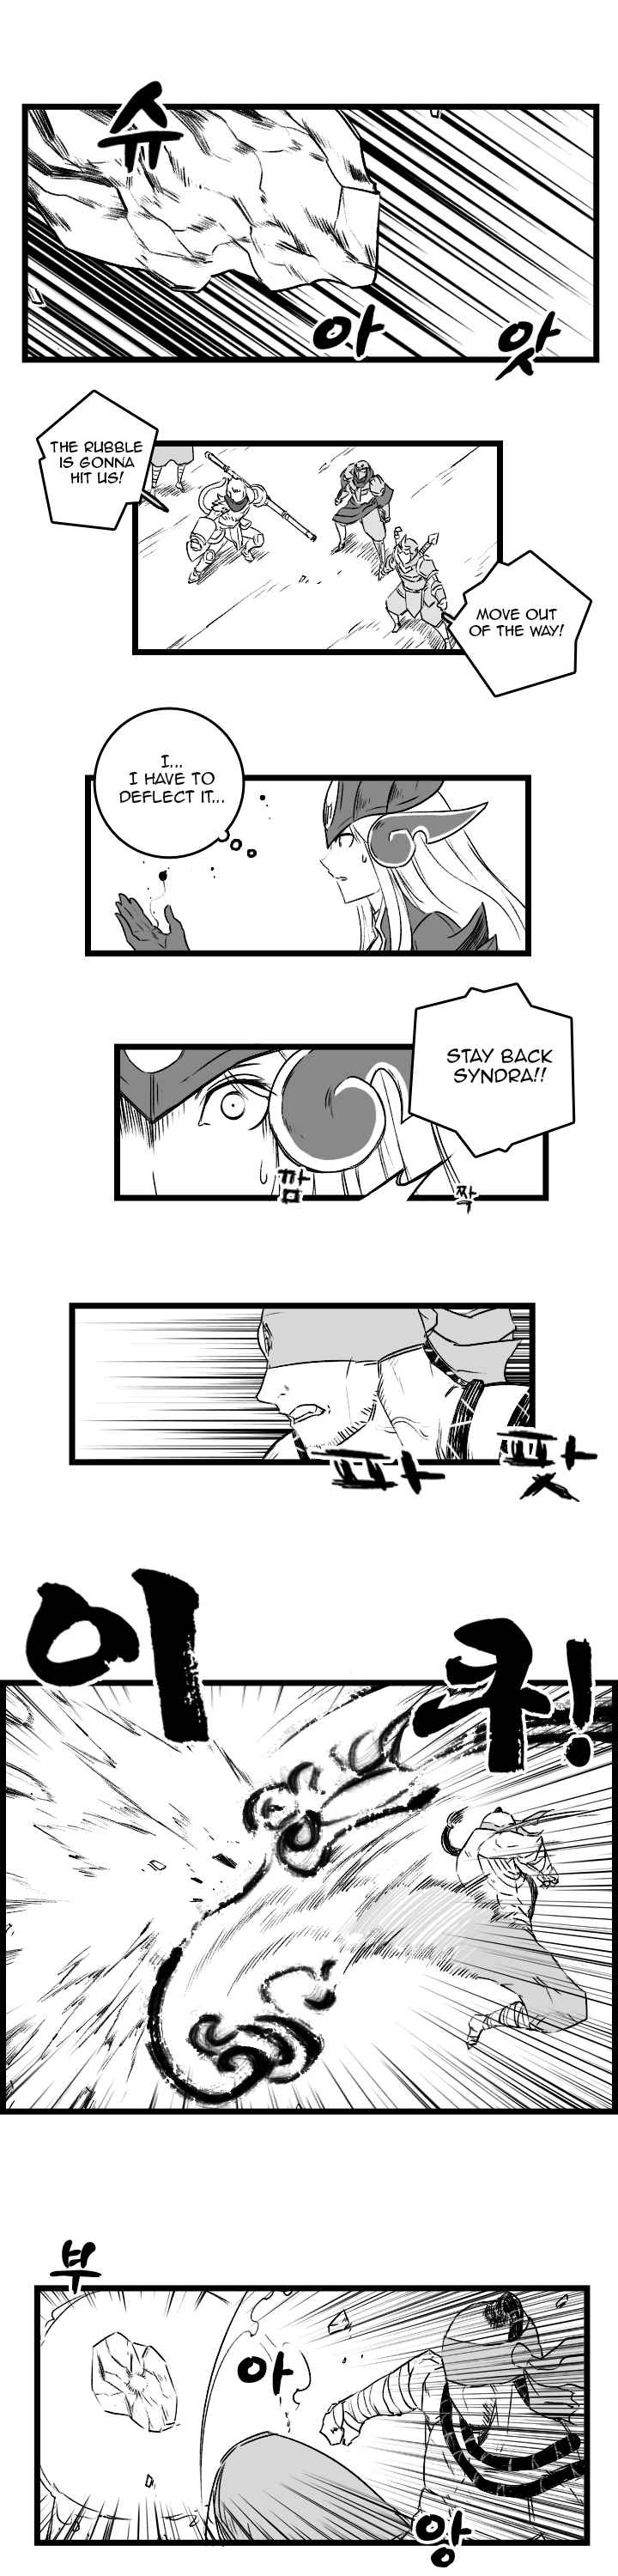 League of Legends Syndra & Zed's Everyday Life (Doujinshi) Vol. 3 Ch. 37